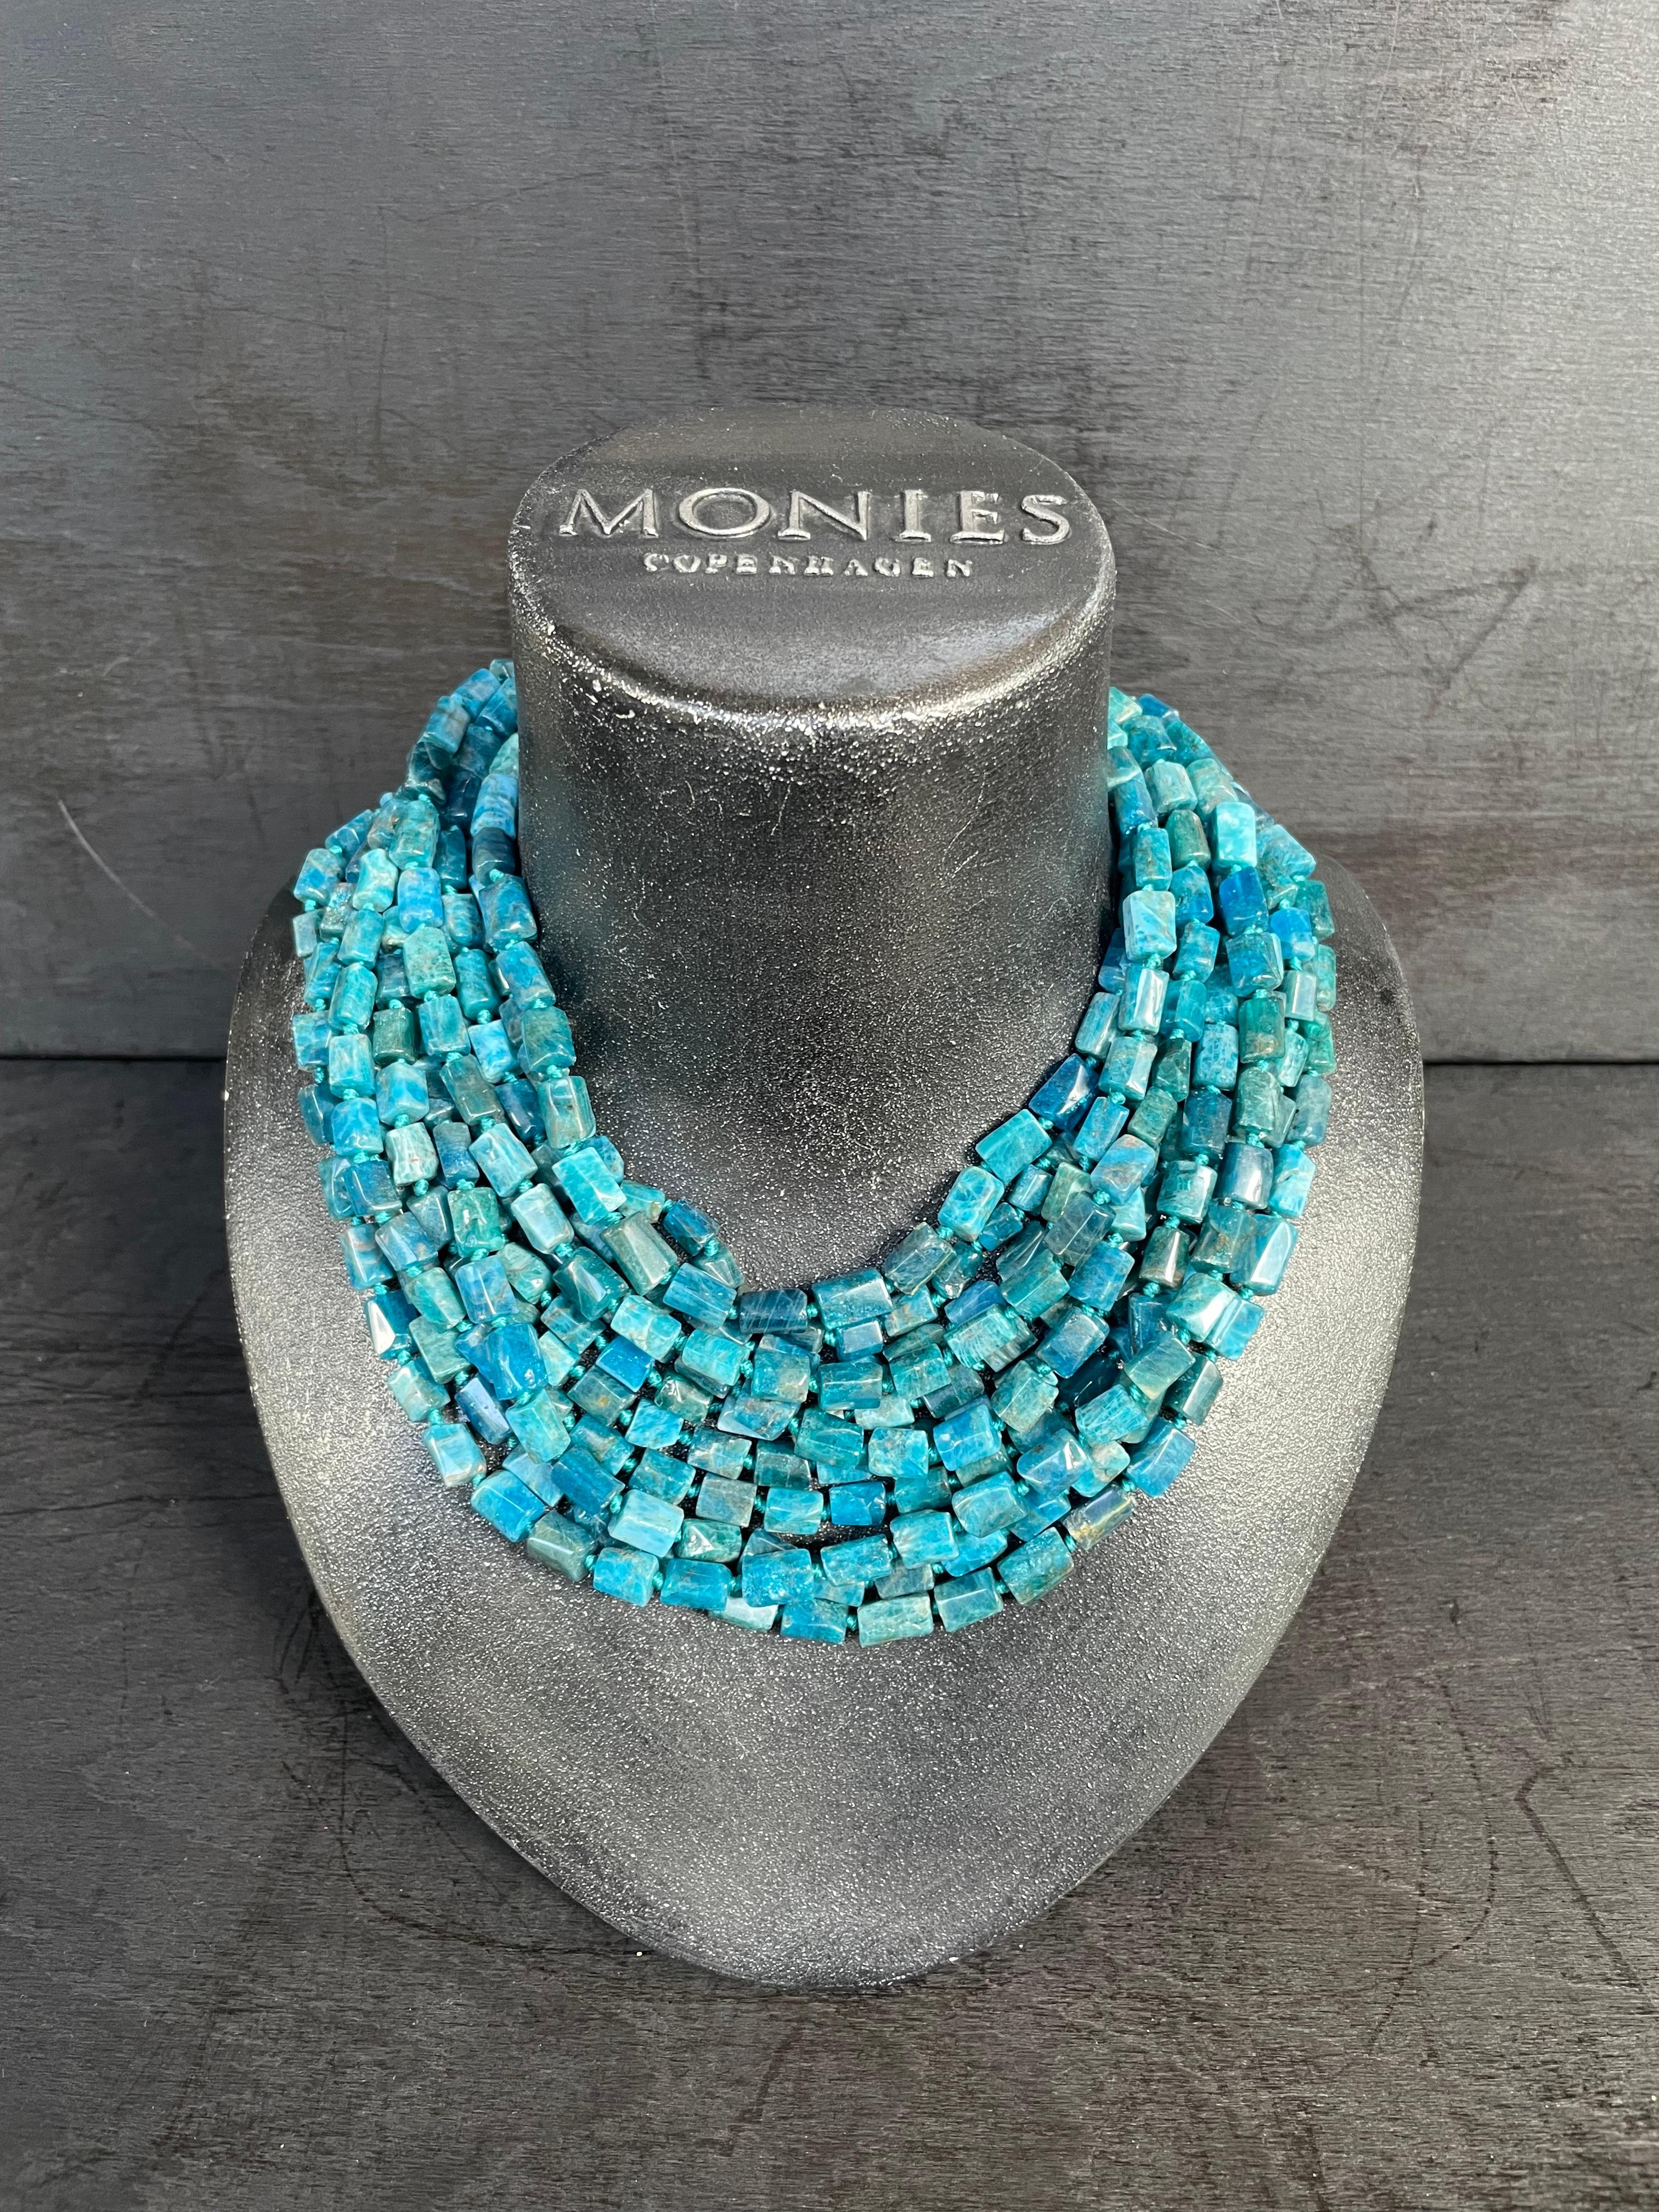 One-of-a-kind statement necklace from the Danish jewellery brand, Monies. 
Made in Blue Chrysolite, Lapis Lazuli & Horn with a leather clasp. 

Handcrafted in the Monies Atelier in Copenhagen.